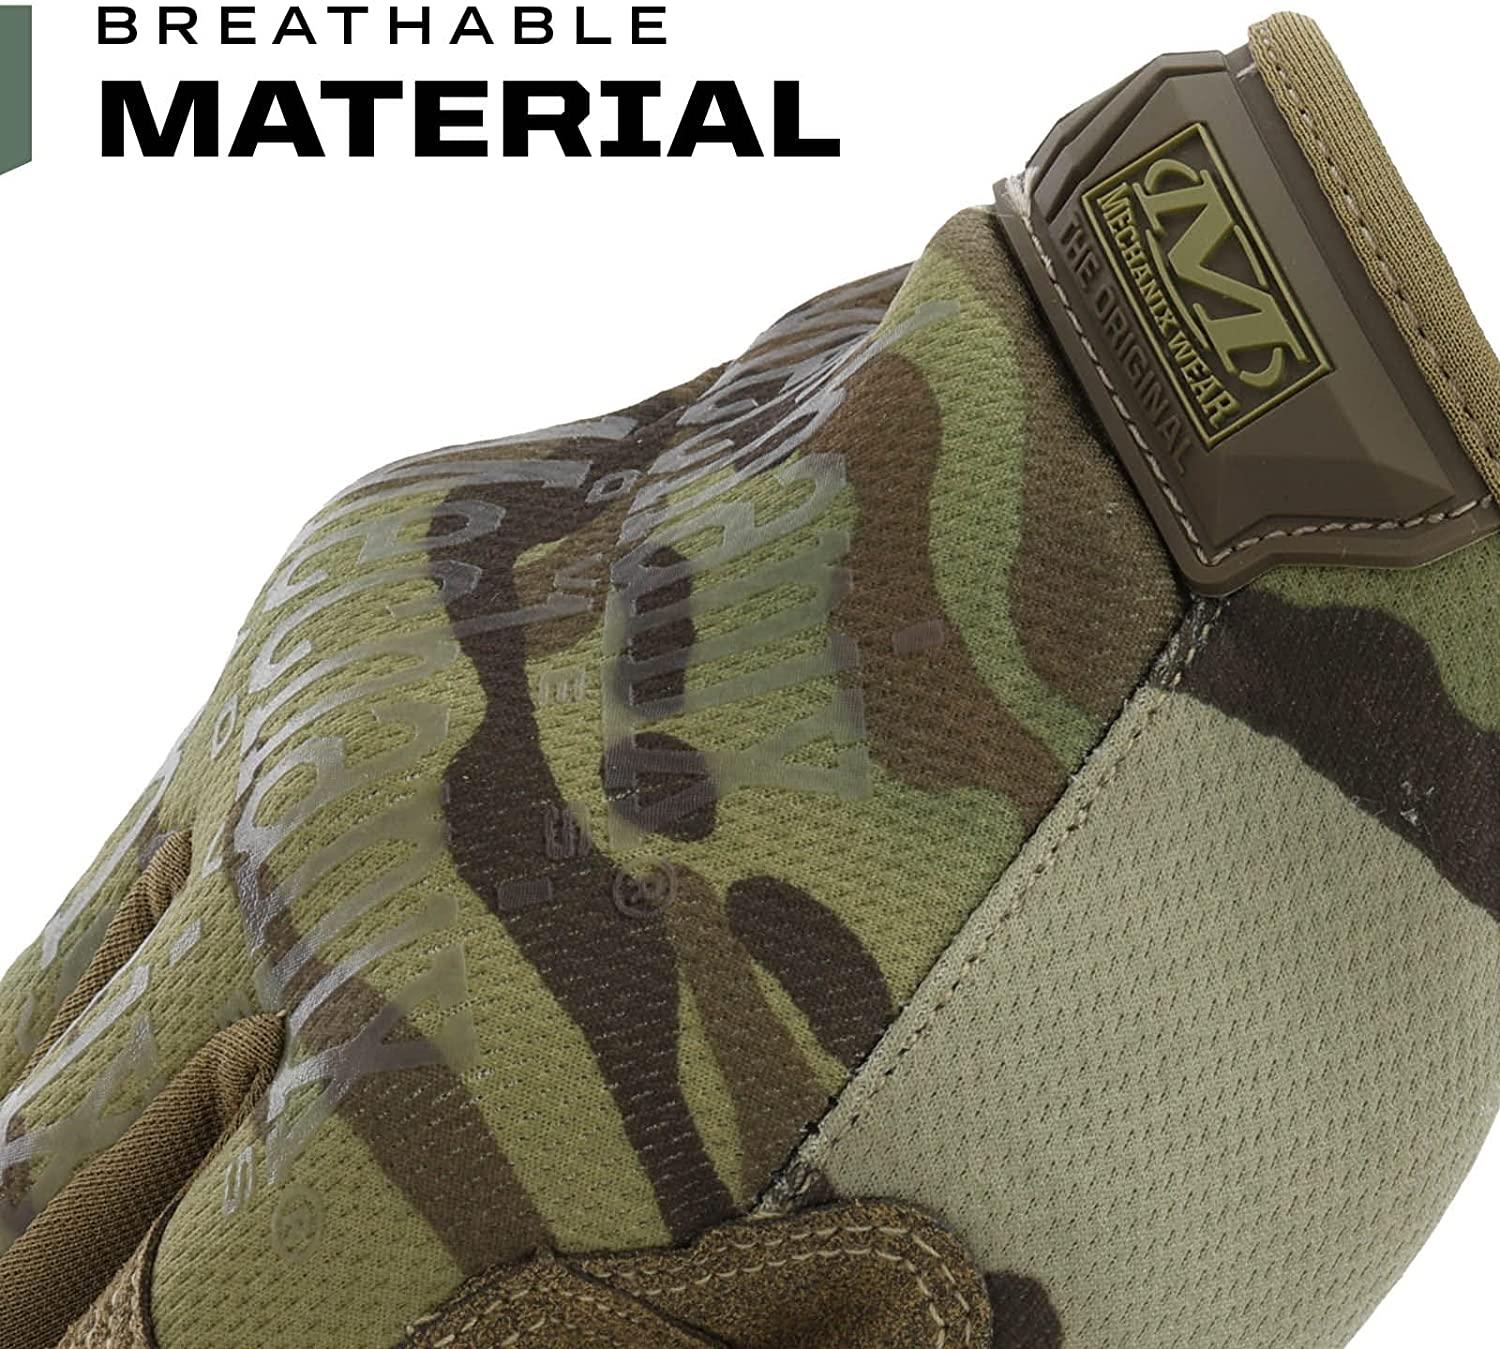 Mechanix Wear: The Original Tactical Work Gloves with Secure Fit, Flexible  Grip for Multi-Purpose Use, Durable Touchscreen Safety Gloves for Men